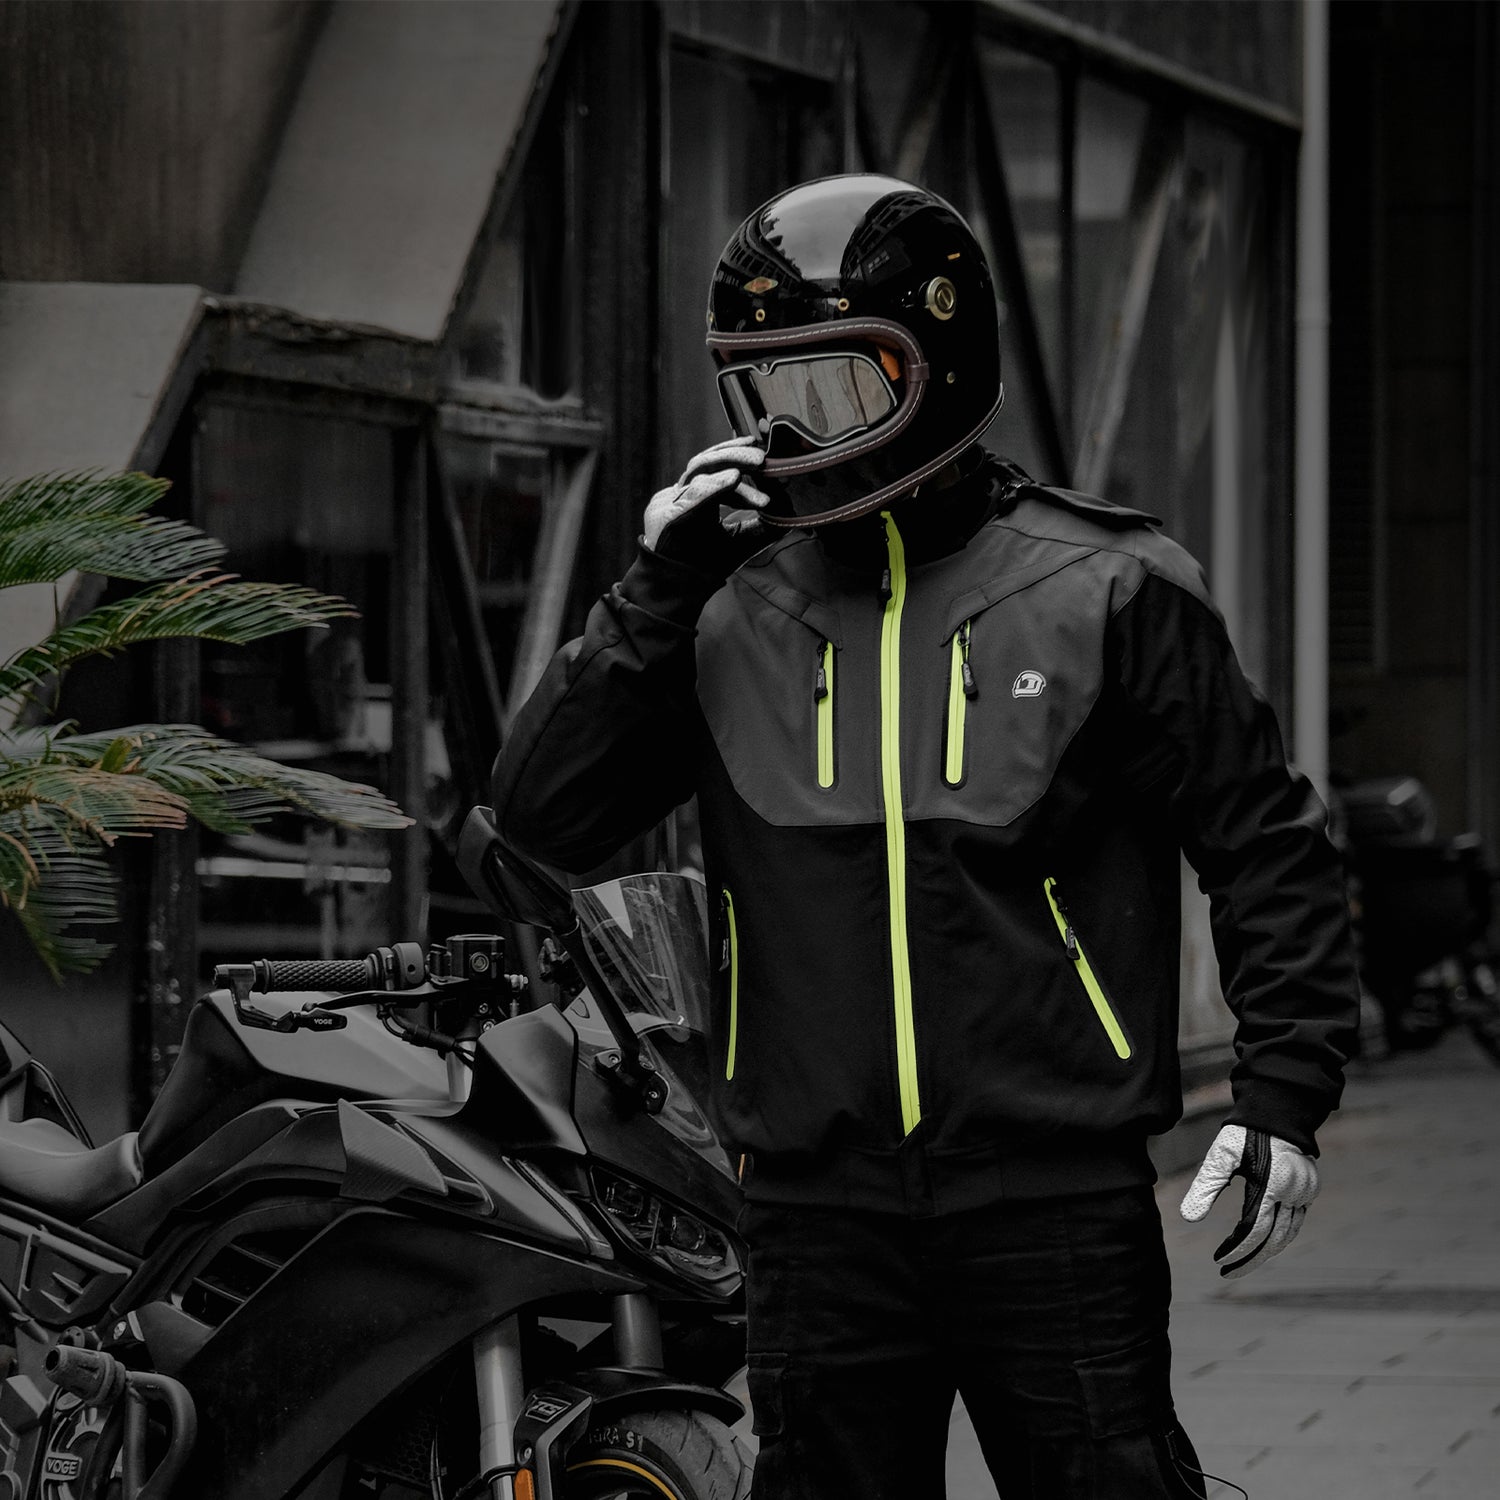 Armored motorcycle protective jacket